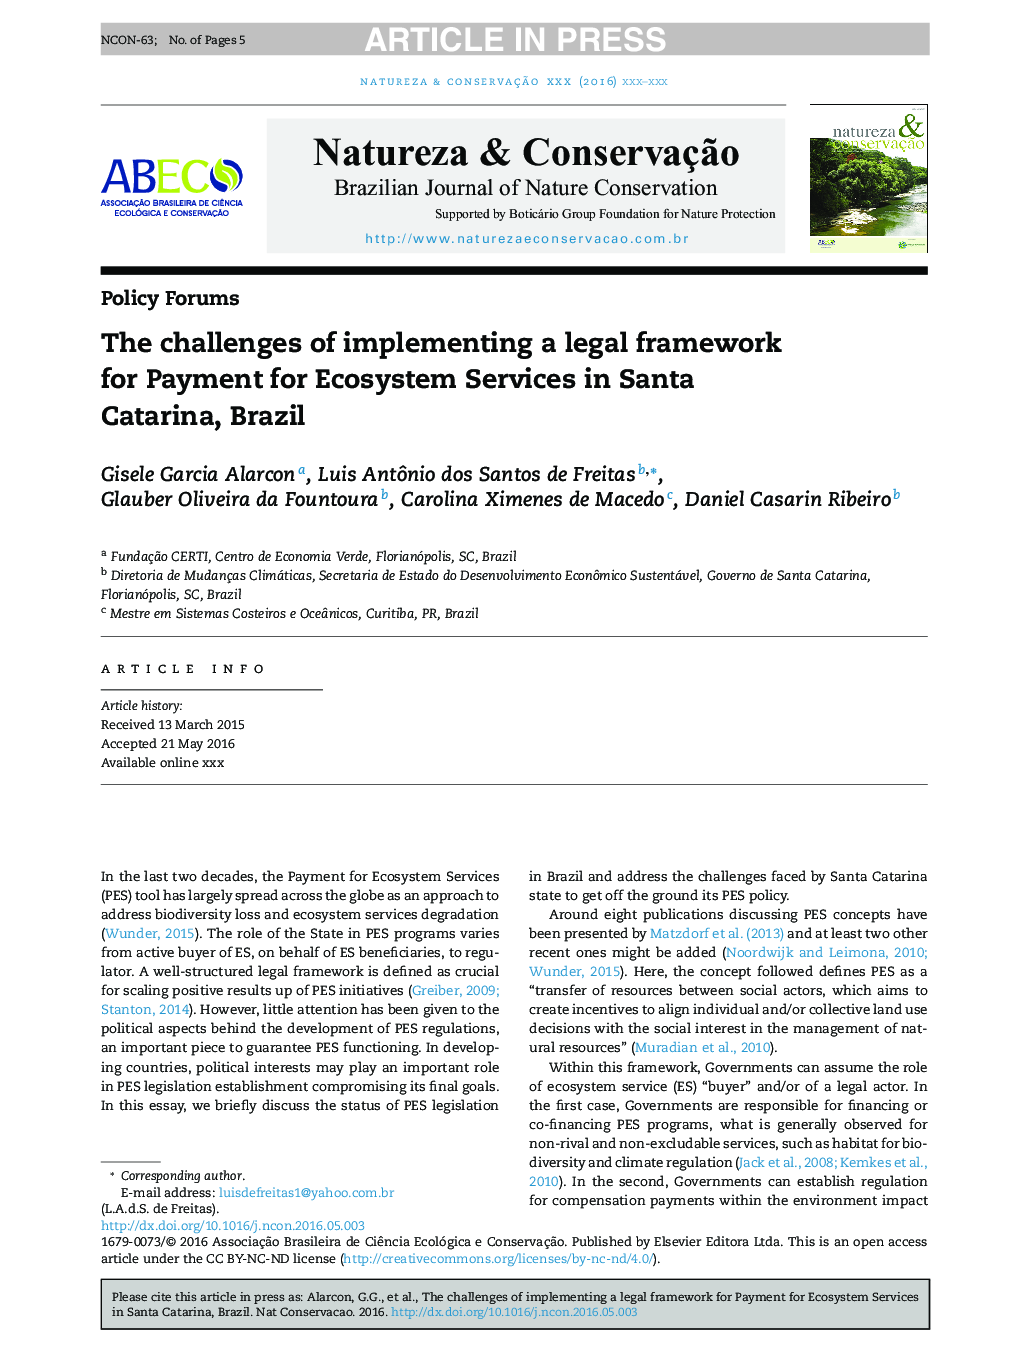 The challenges of implementing a legal framework for Payment for Ecosystem Services in Santa Catarina, Brazil